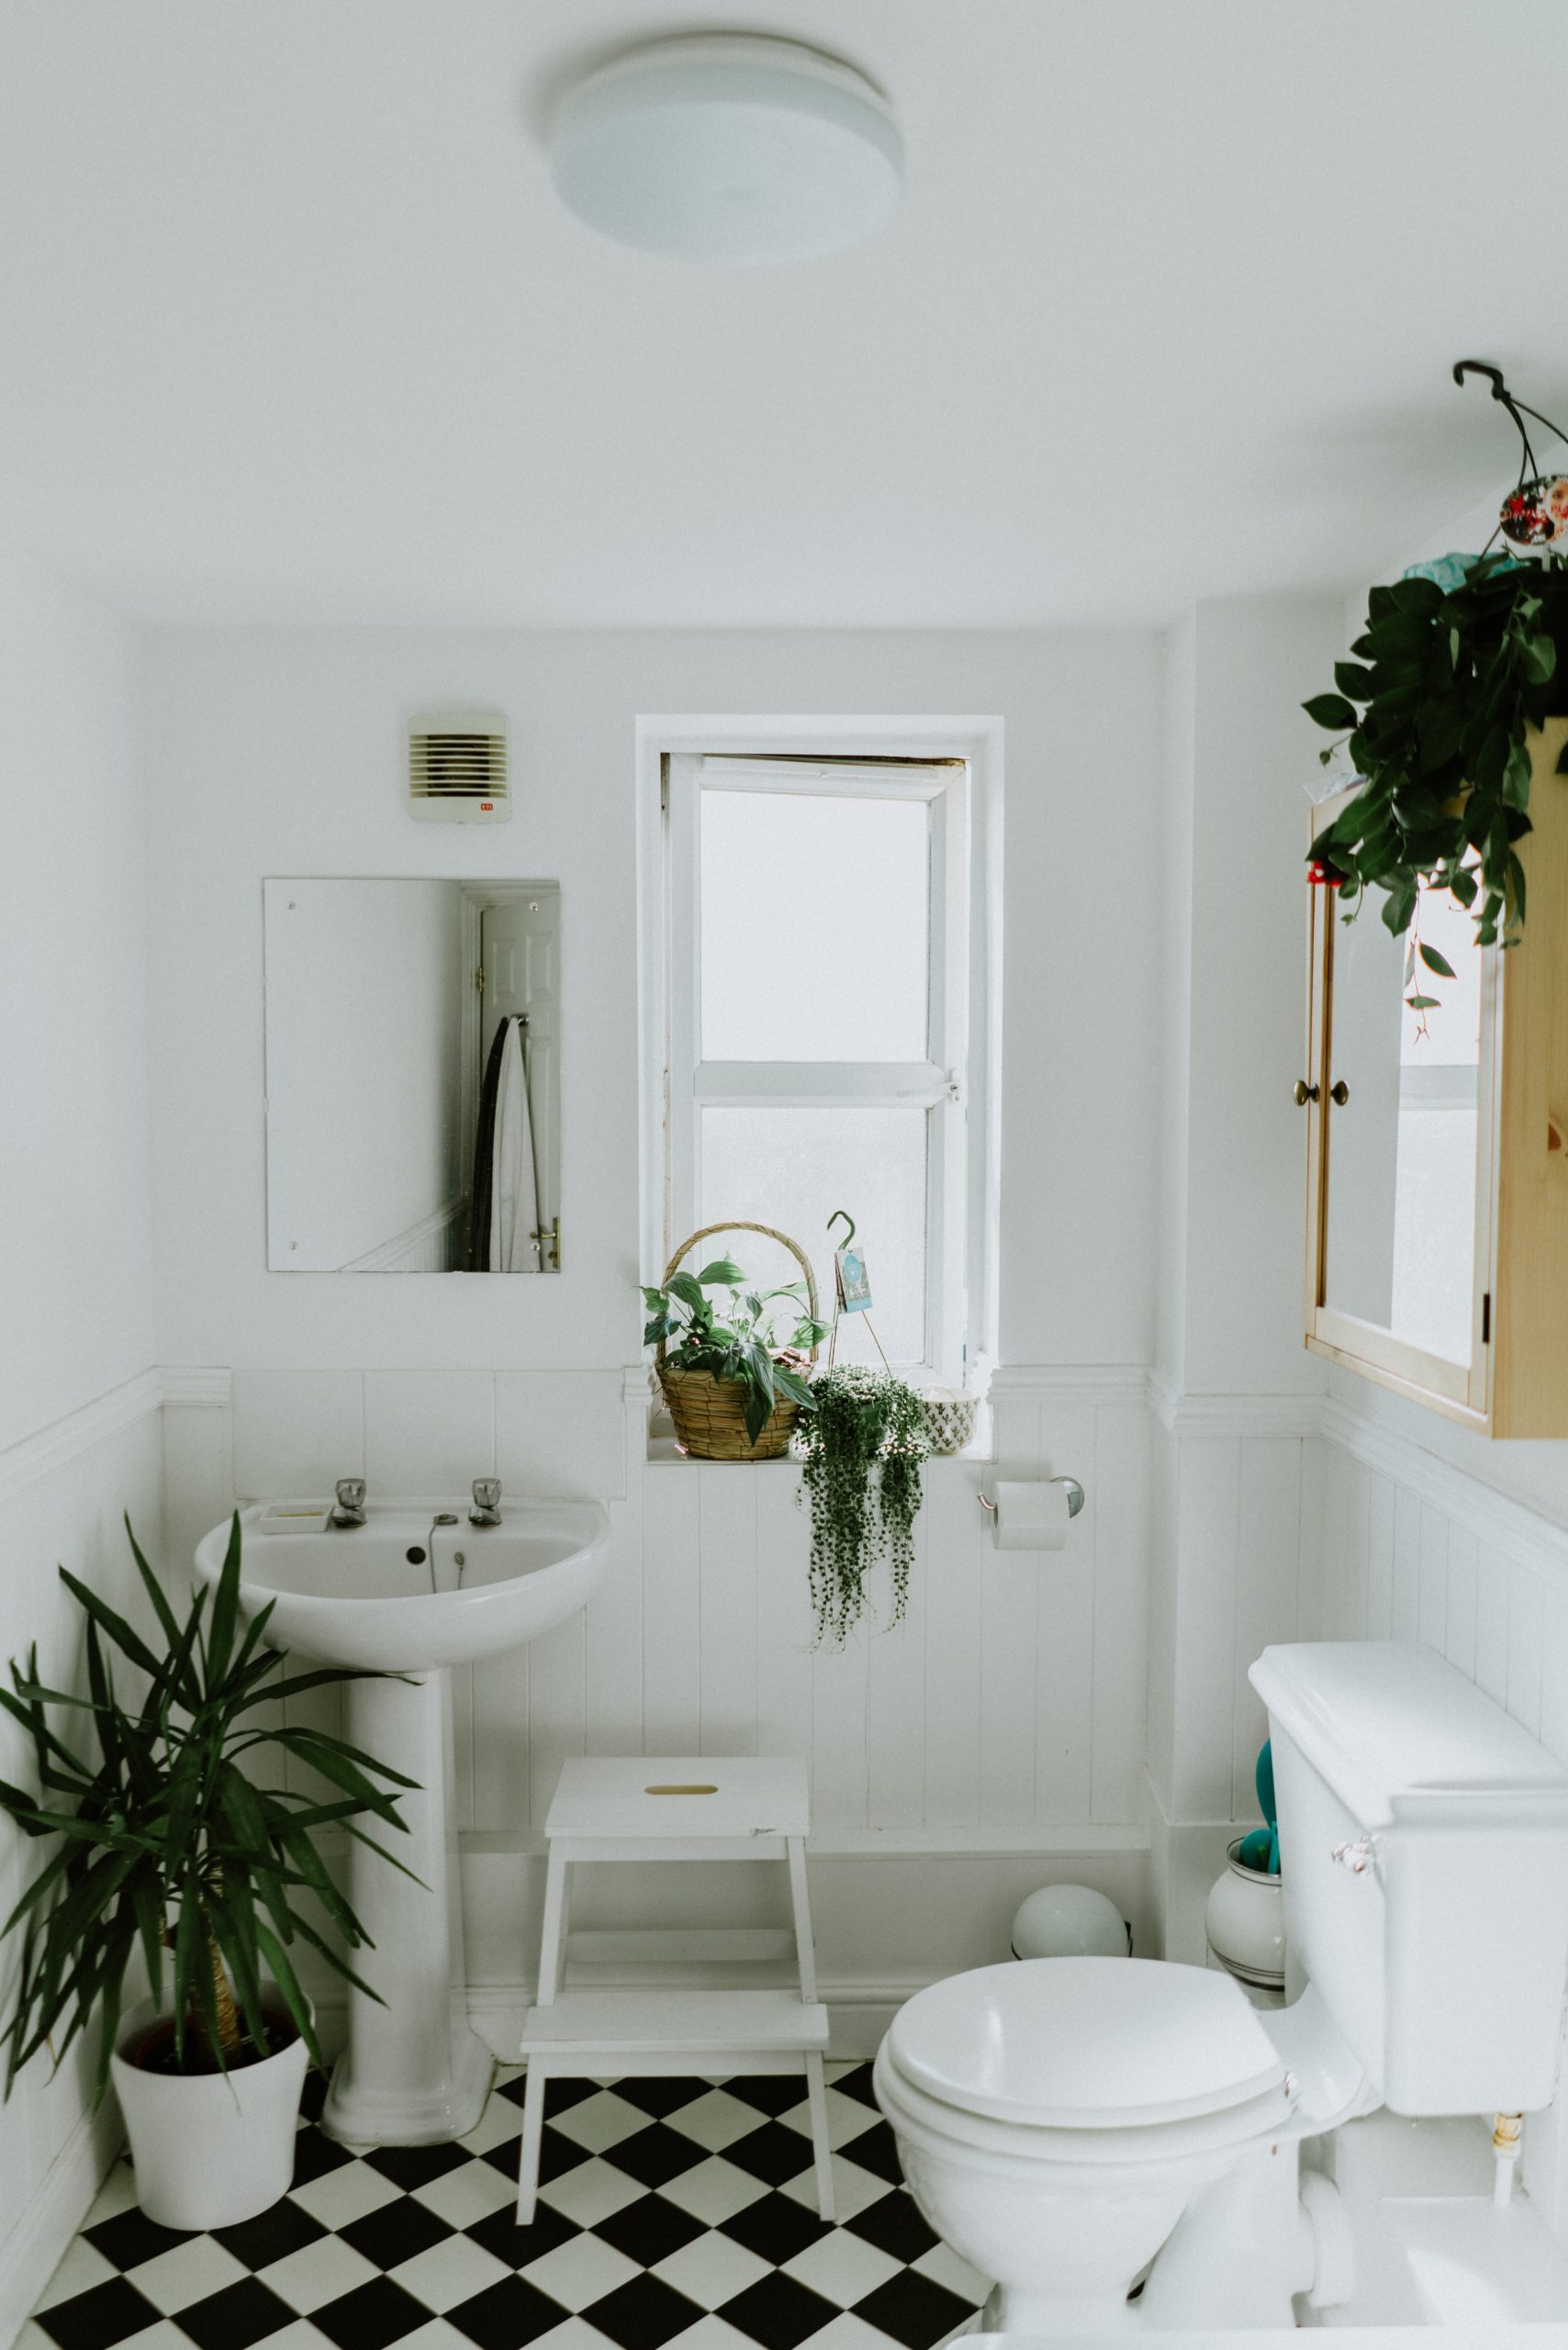 Colors and Styles for a Small Bathroom